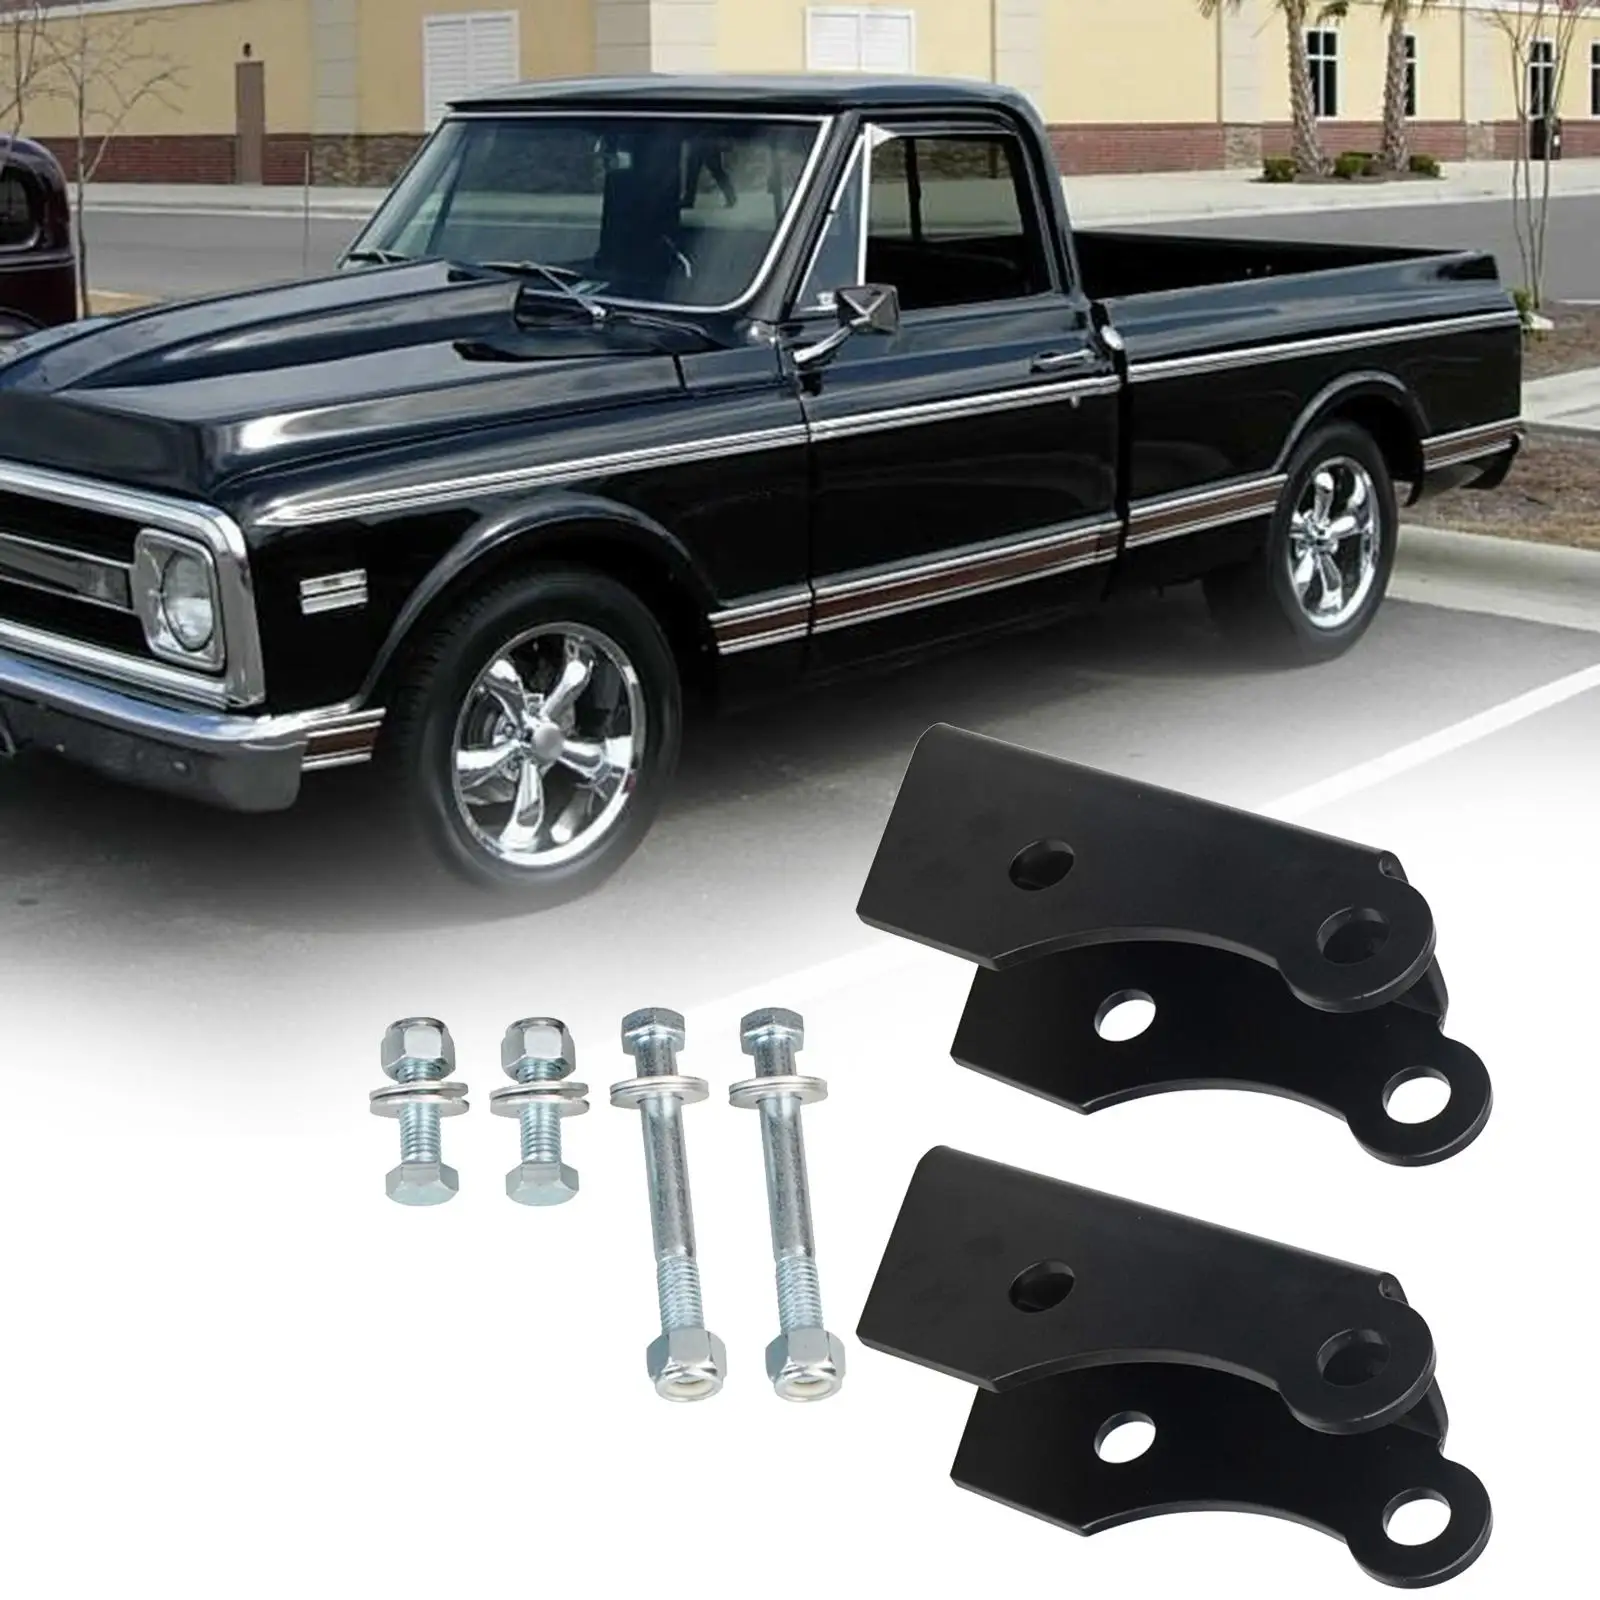 2x Drop Shock Extensions Lowering Set Iron for GMC C10 Sierra C15 Jimmy